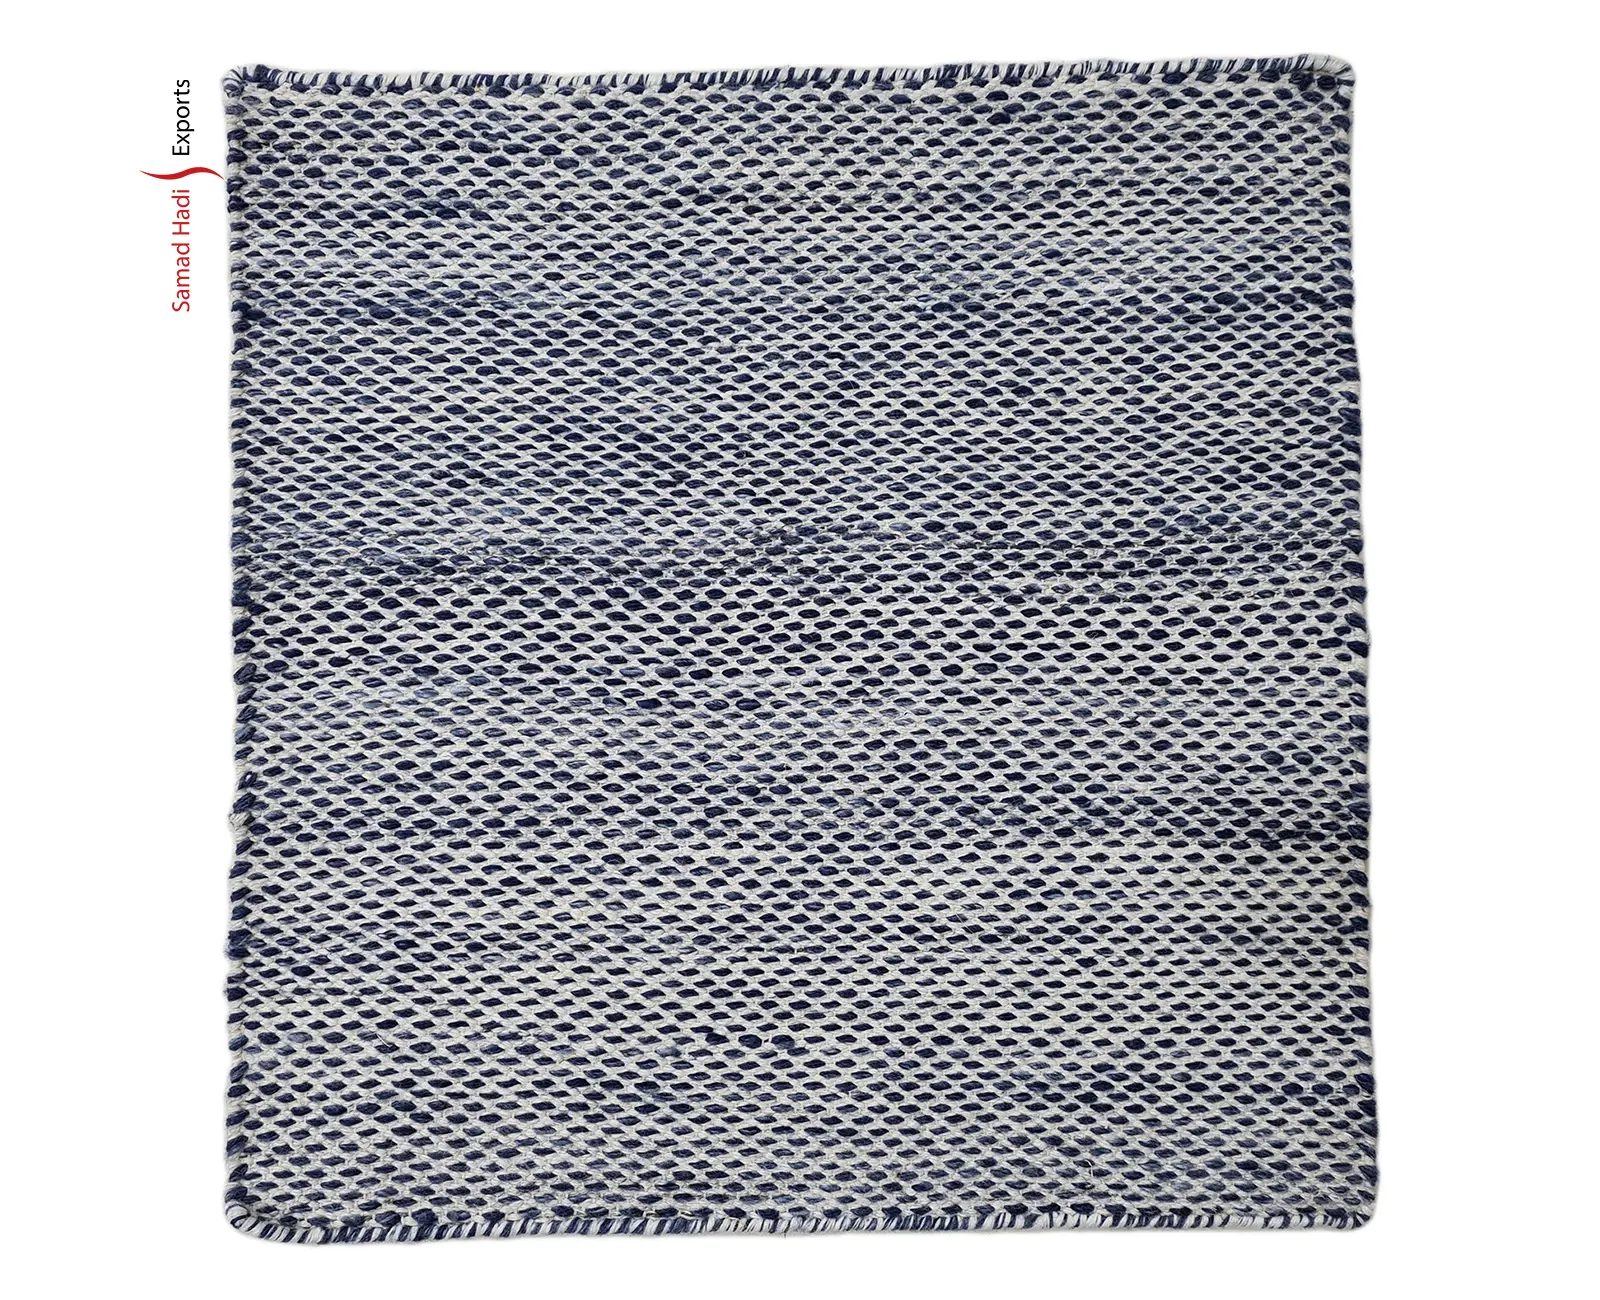 High Quality Recycled PET Yarn Hand Woven Flatweave Rugs Bulk Sale Custom and Program Order Rugs for Living Room Kitchen Outdoor